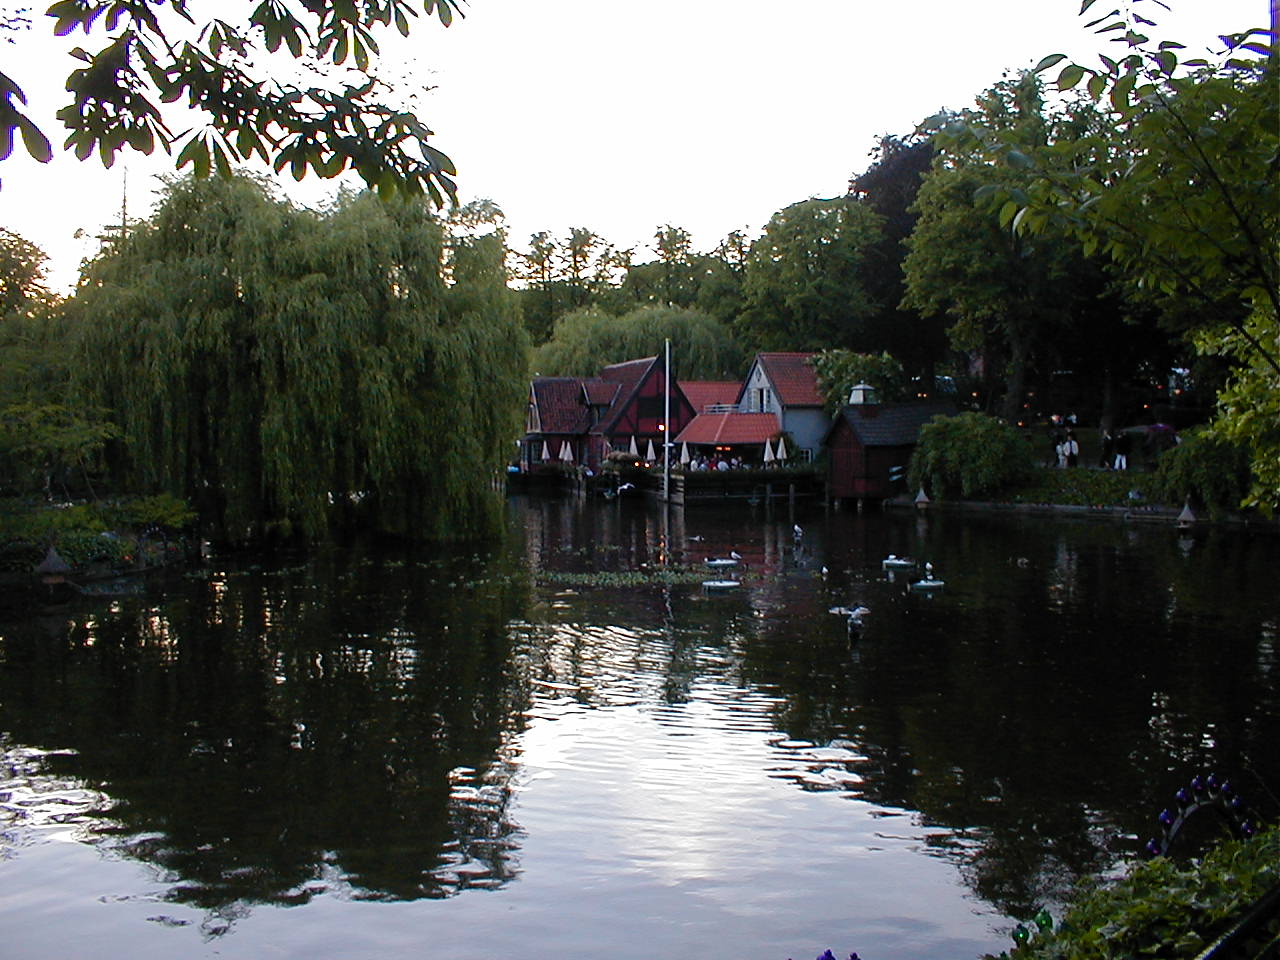 an image of the lake that is surrounded by trees